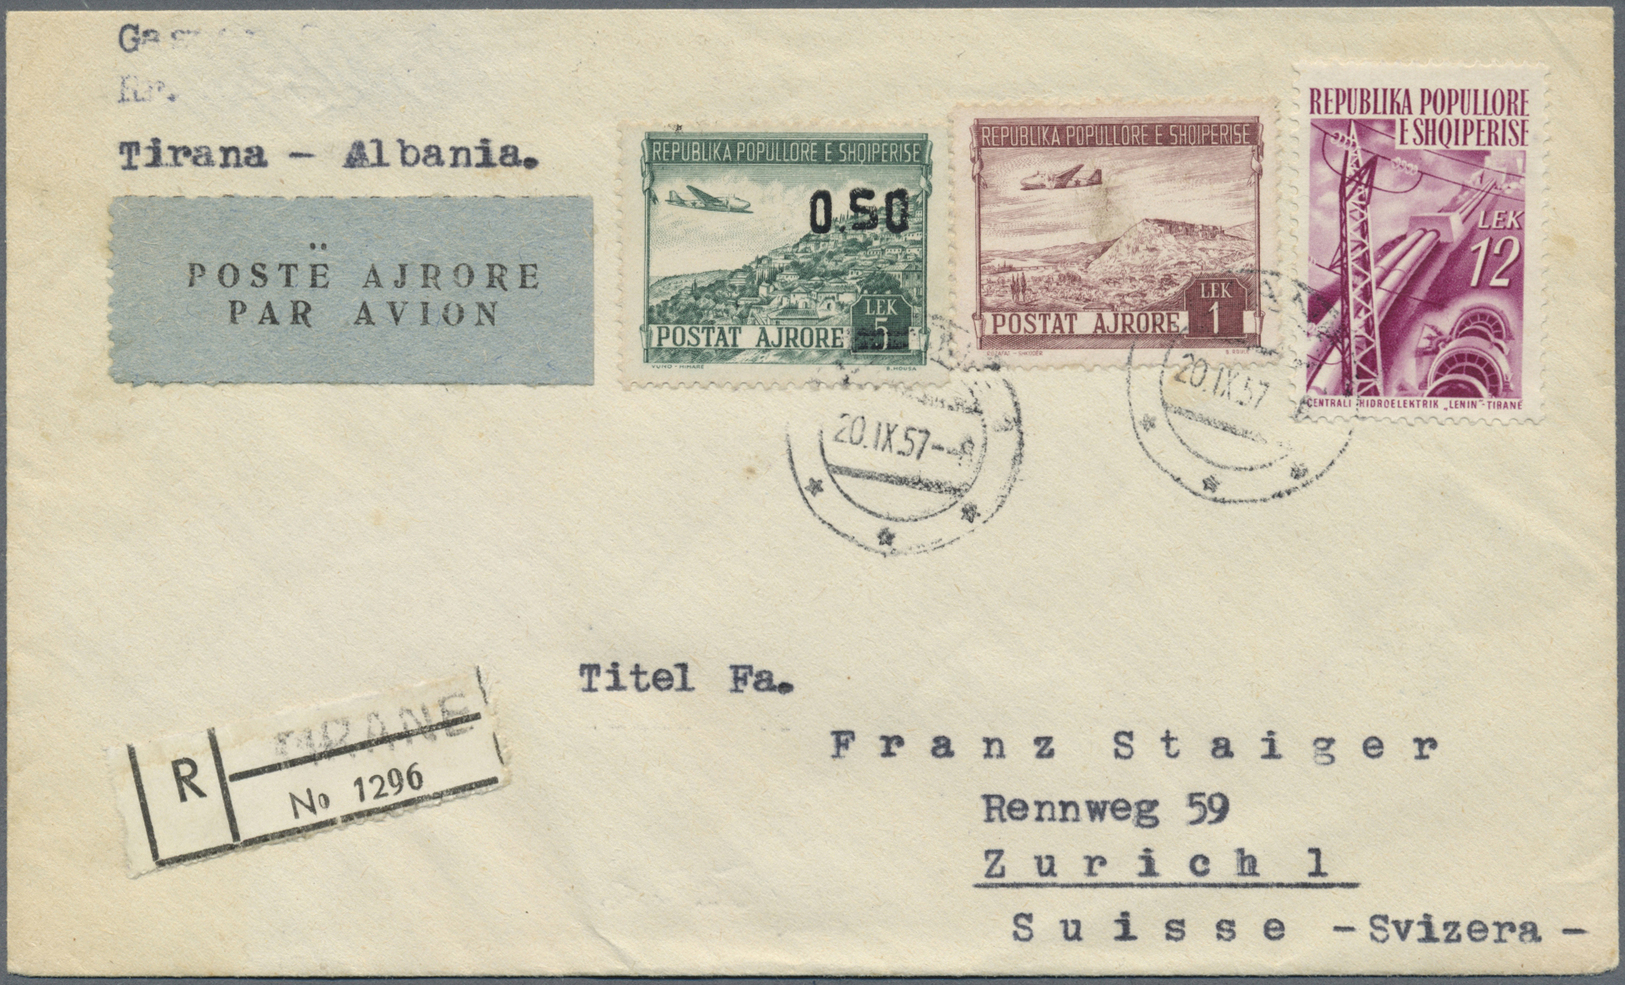 Br Albanien: 1953, Airmail Overprint 0.50 On 5l. Green, Mixed Franking On Registered Airmail Cover From "TIRANE 2 - Albanie